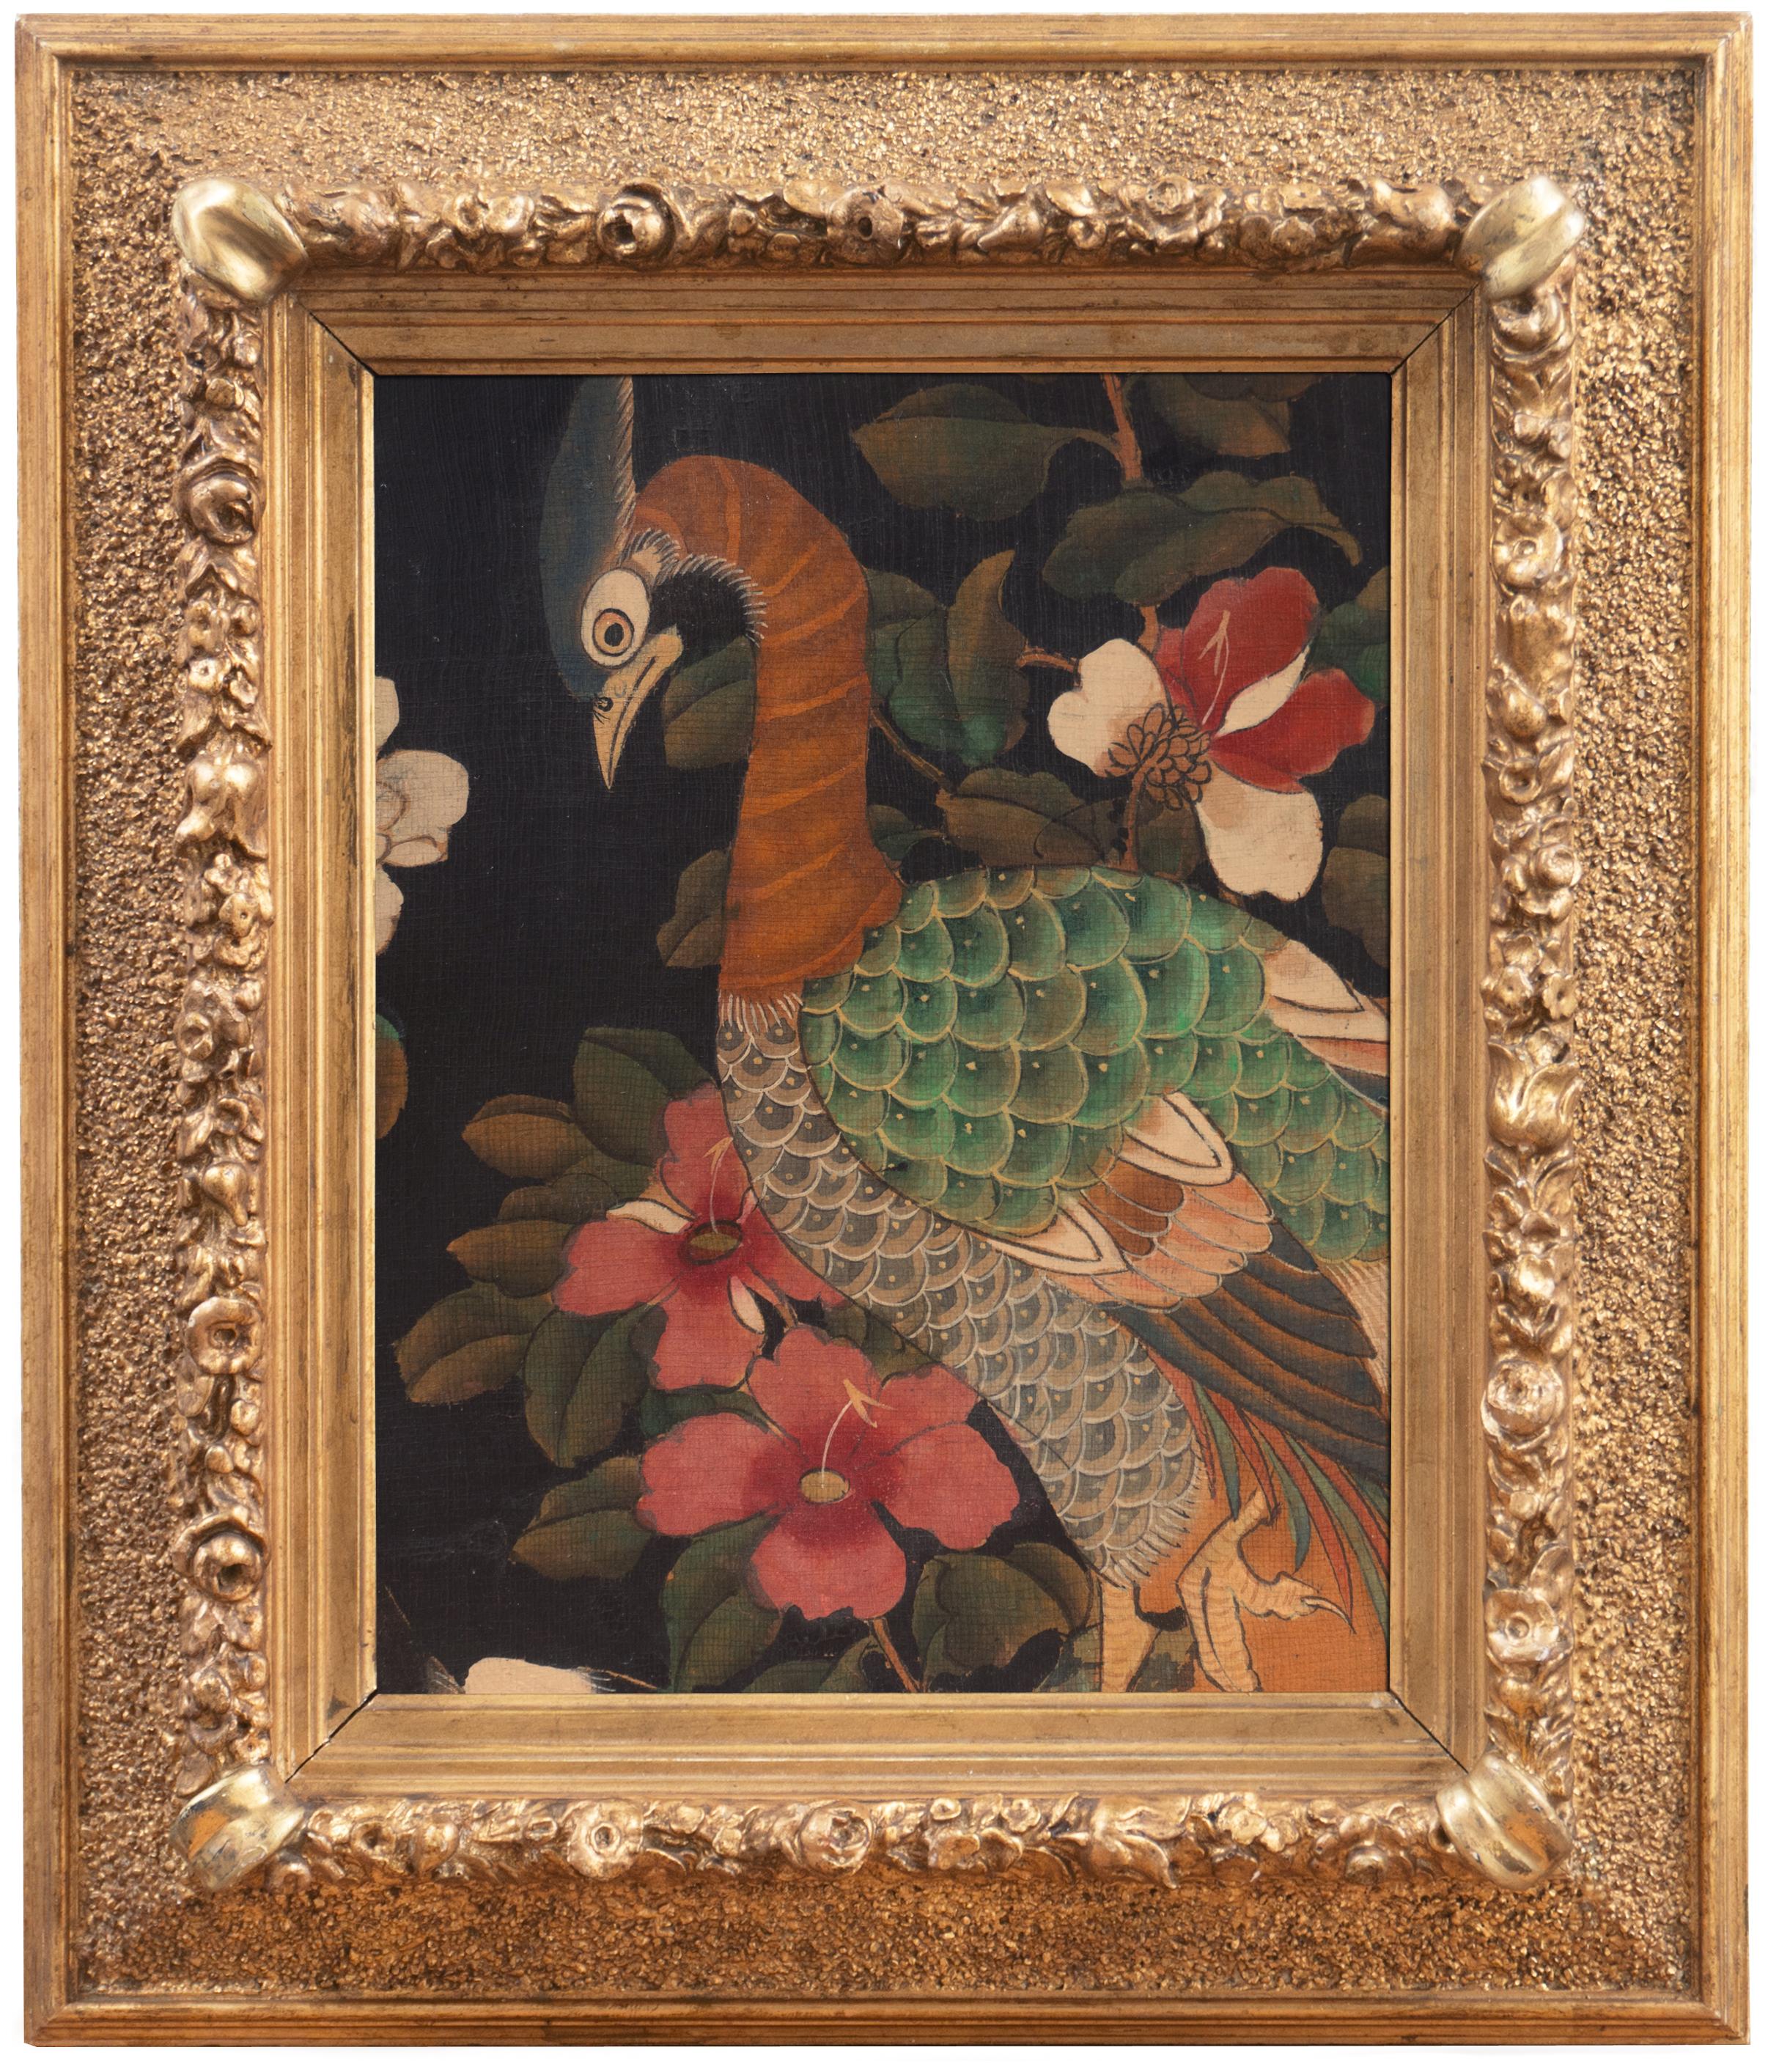 19th Century Chinese school Animal Art - 'Peacock Among Magnolia', Chinese Painting in Period Gilt Frame